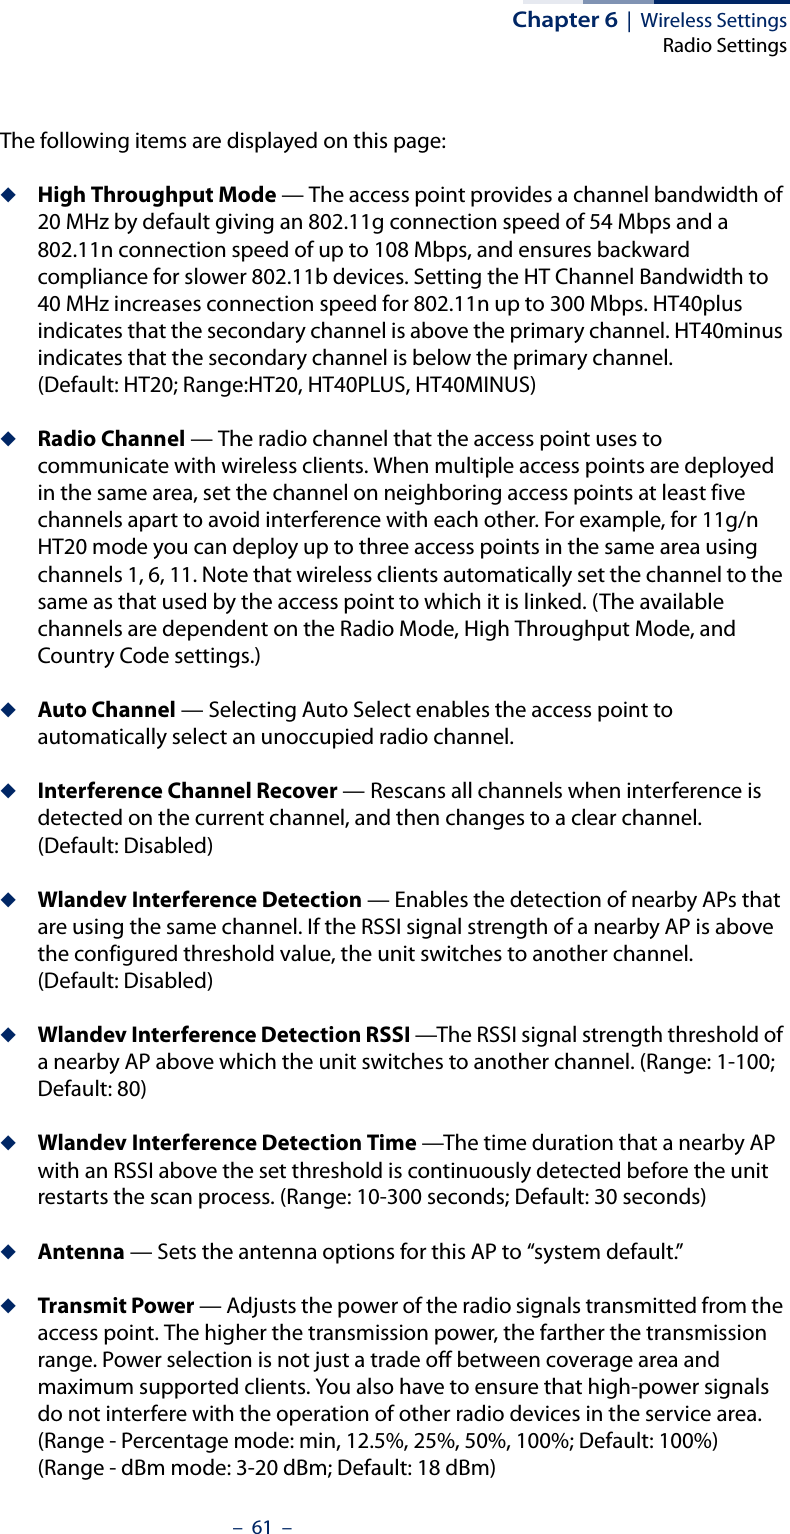 Chapter 6  |  Wireless SettingsRadio Settings–  61  –The following items are displayed on this page:◆High Throughput Mode — The access point provides a channel bandwidth of 20 MHz by default giving an 802.11g connection speed of 54 Mbps and a 802.11n connection speed of up to 108 Mbps, and ensures backward compliance for slower 802.11b devices. Setting the HT Channel Bandwidth to 40 MHz increases connection speed for 802.11n up to 300 Mbps. HT40plus indicates that the secondary channel is above the primary channel. HT40minus indicates that the secondary channel is below the primary channel.(Default: HT20; Range:HT20, HT40PLUS, HT40MINUS)◆Radio Channel — The radio channel that the access point uses to communicate with wireless clients. When multiple access points are deployed in the same area, set the channel on neighboring access points at least five channels apart to avoid interference with each other. For example, for 11g/n HT20 mode you can deploy up to three access points in the same area using channels 1, 6, 11. Note that wireless clients automatically set the channel to the same as that used by the access point to which it is linked. (The available channels are dependent on the Radio Mode, High Throughput Mode, and Country Code settings.)◆Auto Channel — Selecting Auto Select enables the access point to automatically select an unoccupied radio channel.◆Interference Channel Recover — Rescans all channels when interference is detected on the current channel, and then changes to a clear channel. (Default: Disabled)◆Wlandev Interference Detection — Enables the detection of nearby APs that are using the same channel. If the RSSI signal strength of a nearby AP is above the configured threshold value, the unit switches to another channel. (Default: Disabled)◆Wlandev Interference Detection RSSI —The RSSI signal strength threshold of a nearby AP above which the unit switches to another channel. (Range: 1-100; Default: 80)◆Wlandev Interference Detection Time —The time duration that a nearby AP with an RSSI above the set threshold is continuously detected before the unit restarts the scan process. (Range: 10-300 seconds; Default: 30 seconds)◆Antenna — Sets the antenna options for this AP to “system default.”◆Transmit Power — Adjusts the power of the radio signals transmitted from the access point. The higher the transmission power, the farther the transmission range. Power selection is not just a trade off between coverage area and maximum supported clients. You also have to ensure that high-power signals do not interfere with the operation of other radio devices in the service area. (Range - Percentage mode: min, 12.5%, 25%, 50%, 100%; Default: 100%)(Range - dBm mode: 3-20 dBm; Default: 18 dBm)